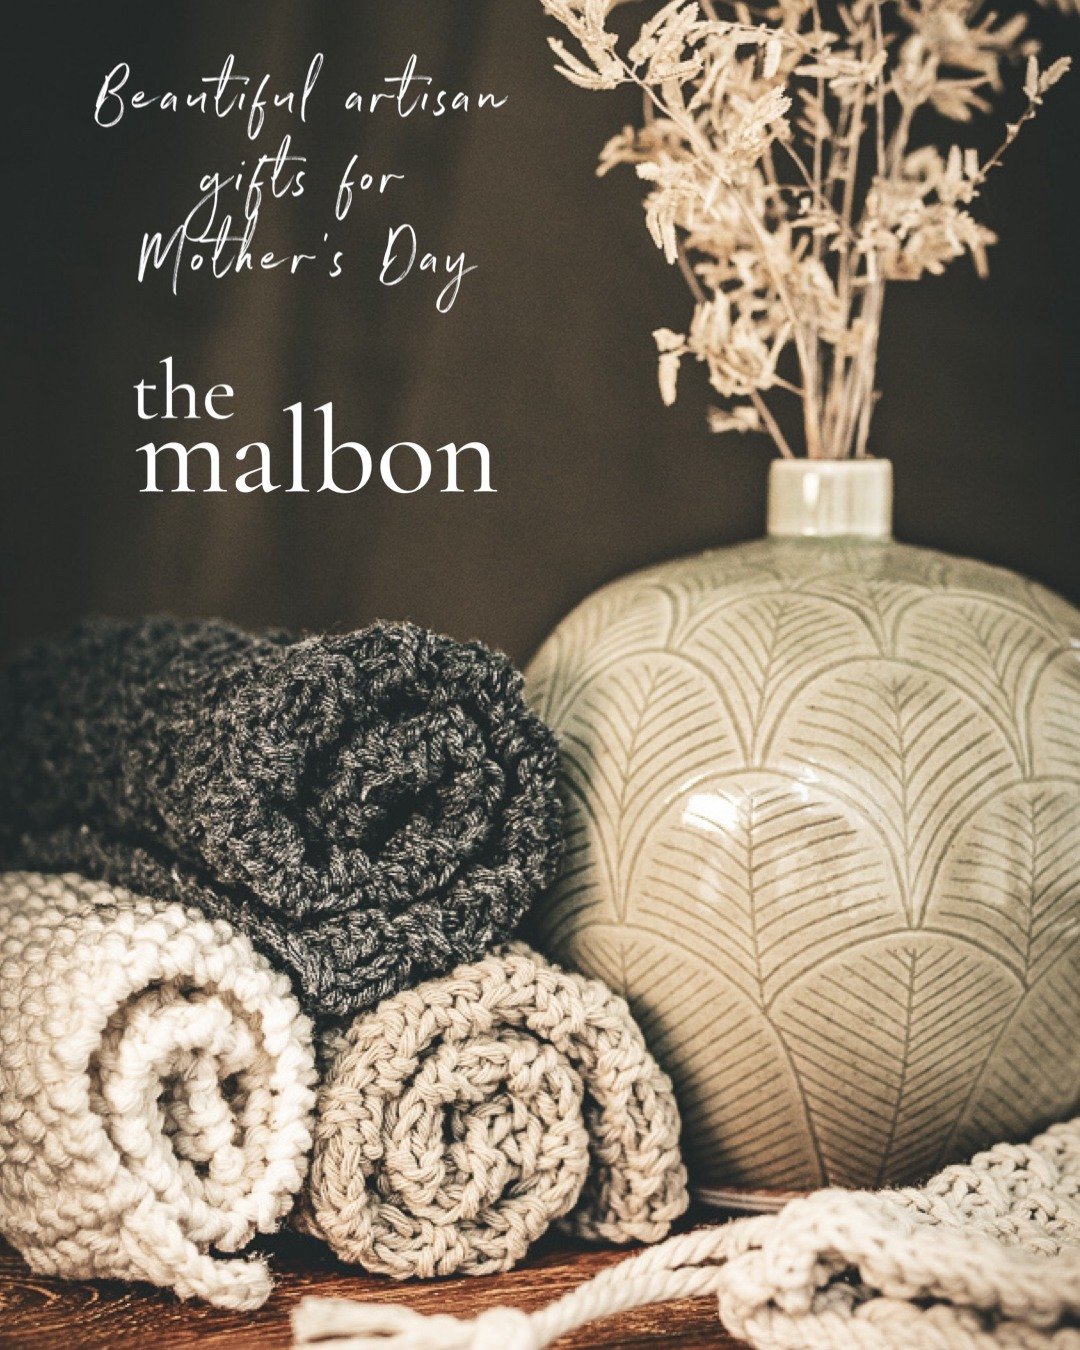 Pop into The Malbon to see our beautiful range of artisan gifts, perfect for Mother's Day. 

#mothersdaygift #artisangifts #mothersday #mothersdaygiftideas #canberra #bungendore #visitqueanbeyanpalerang